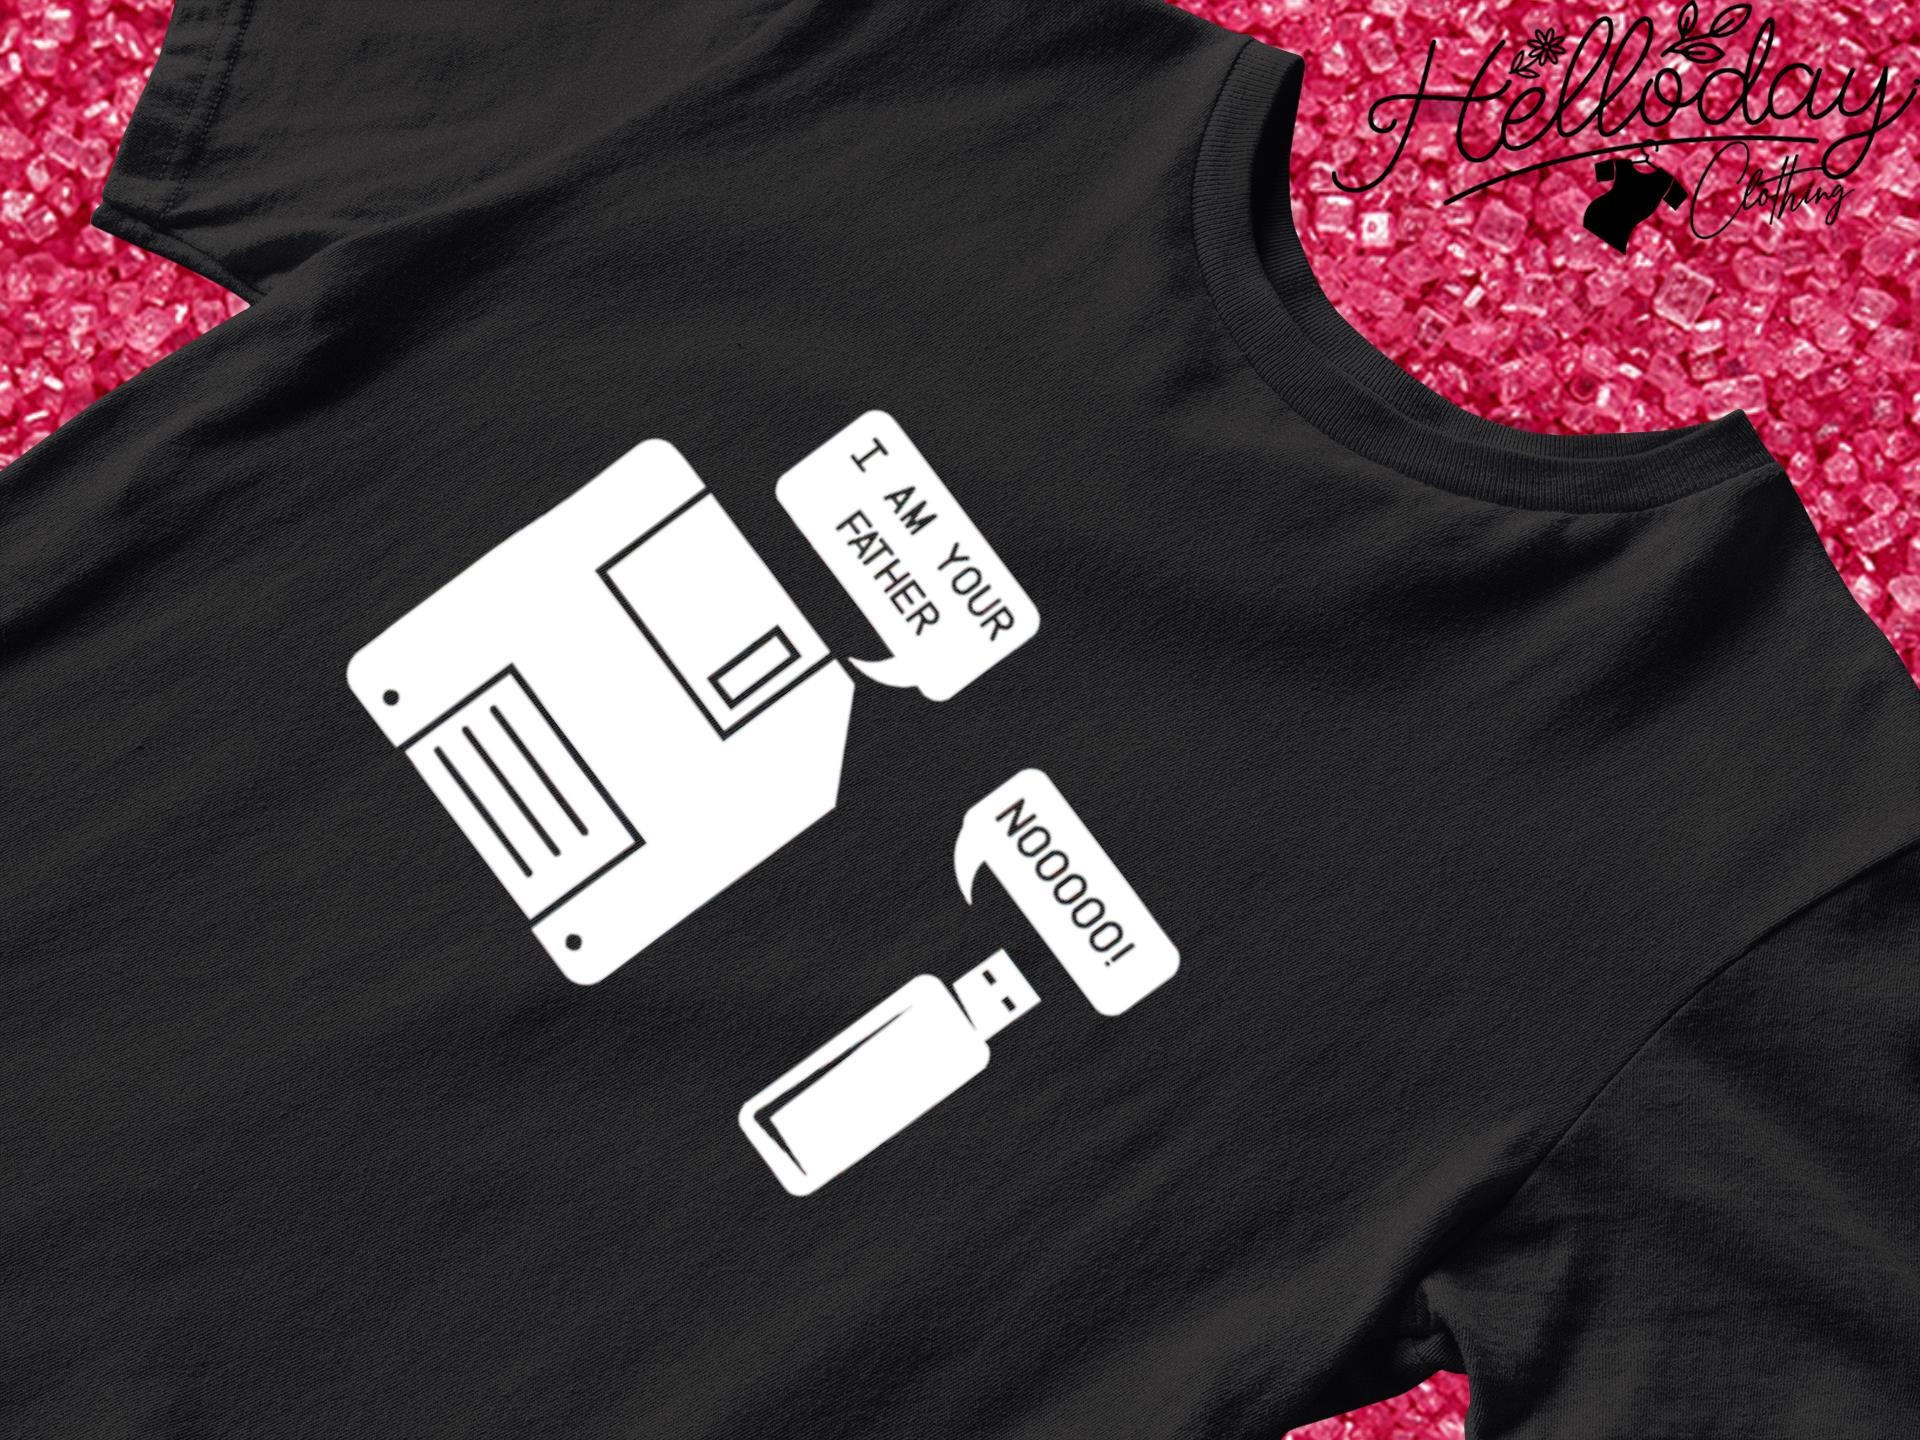 USB Floppy Disk I am your father shirt